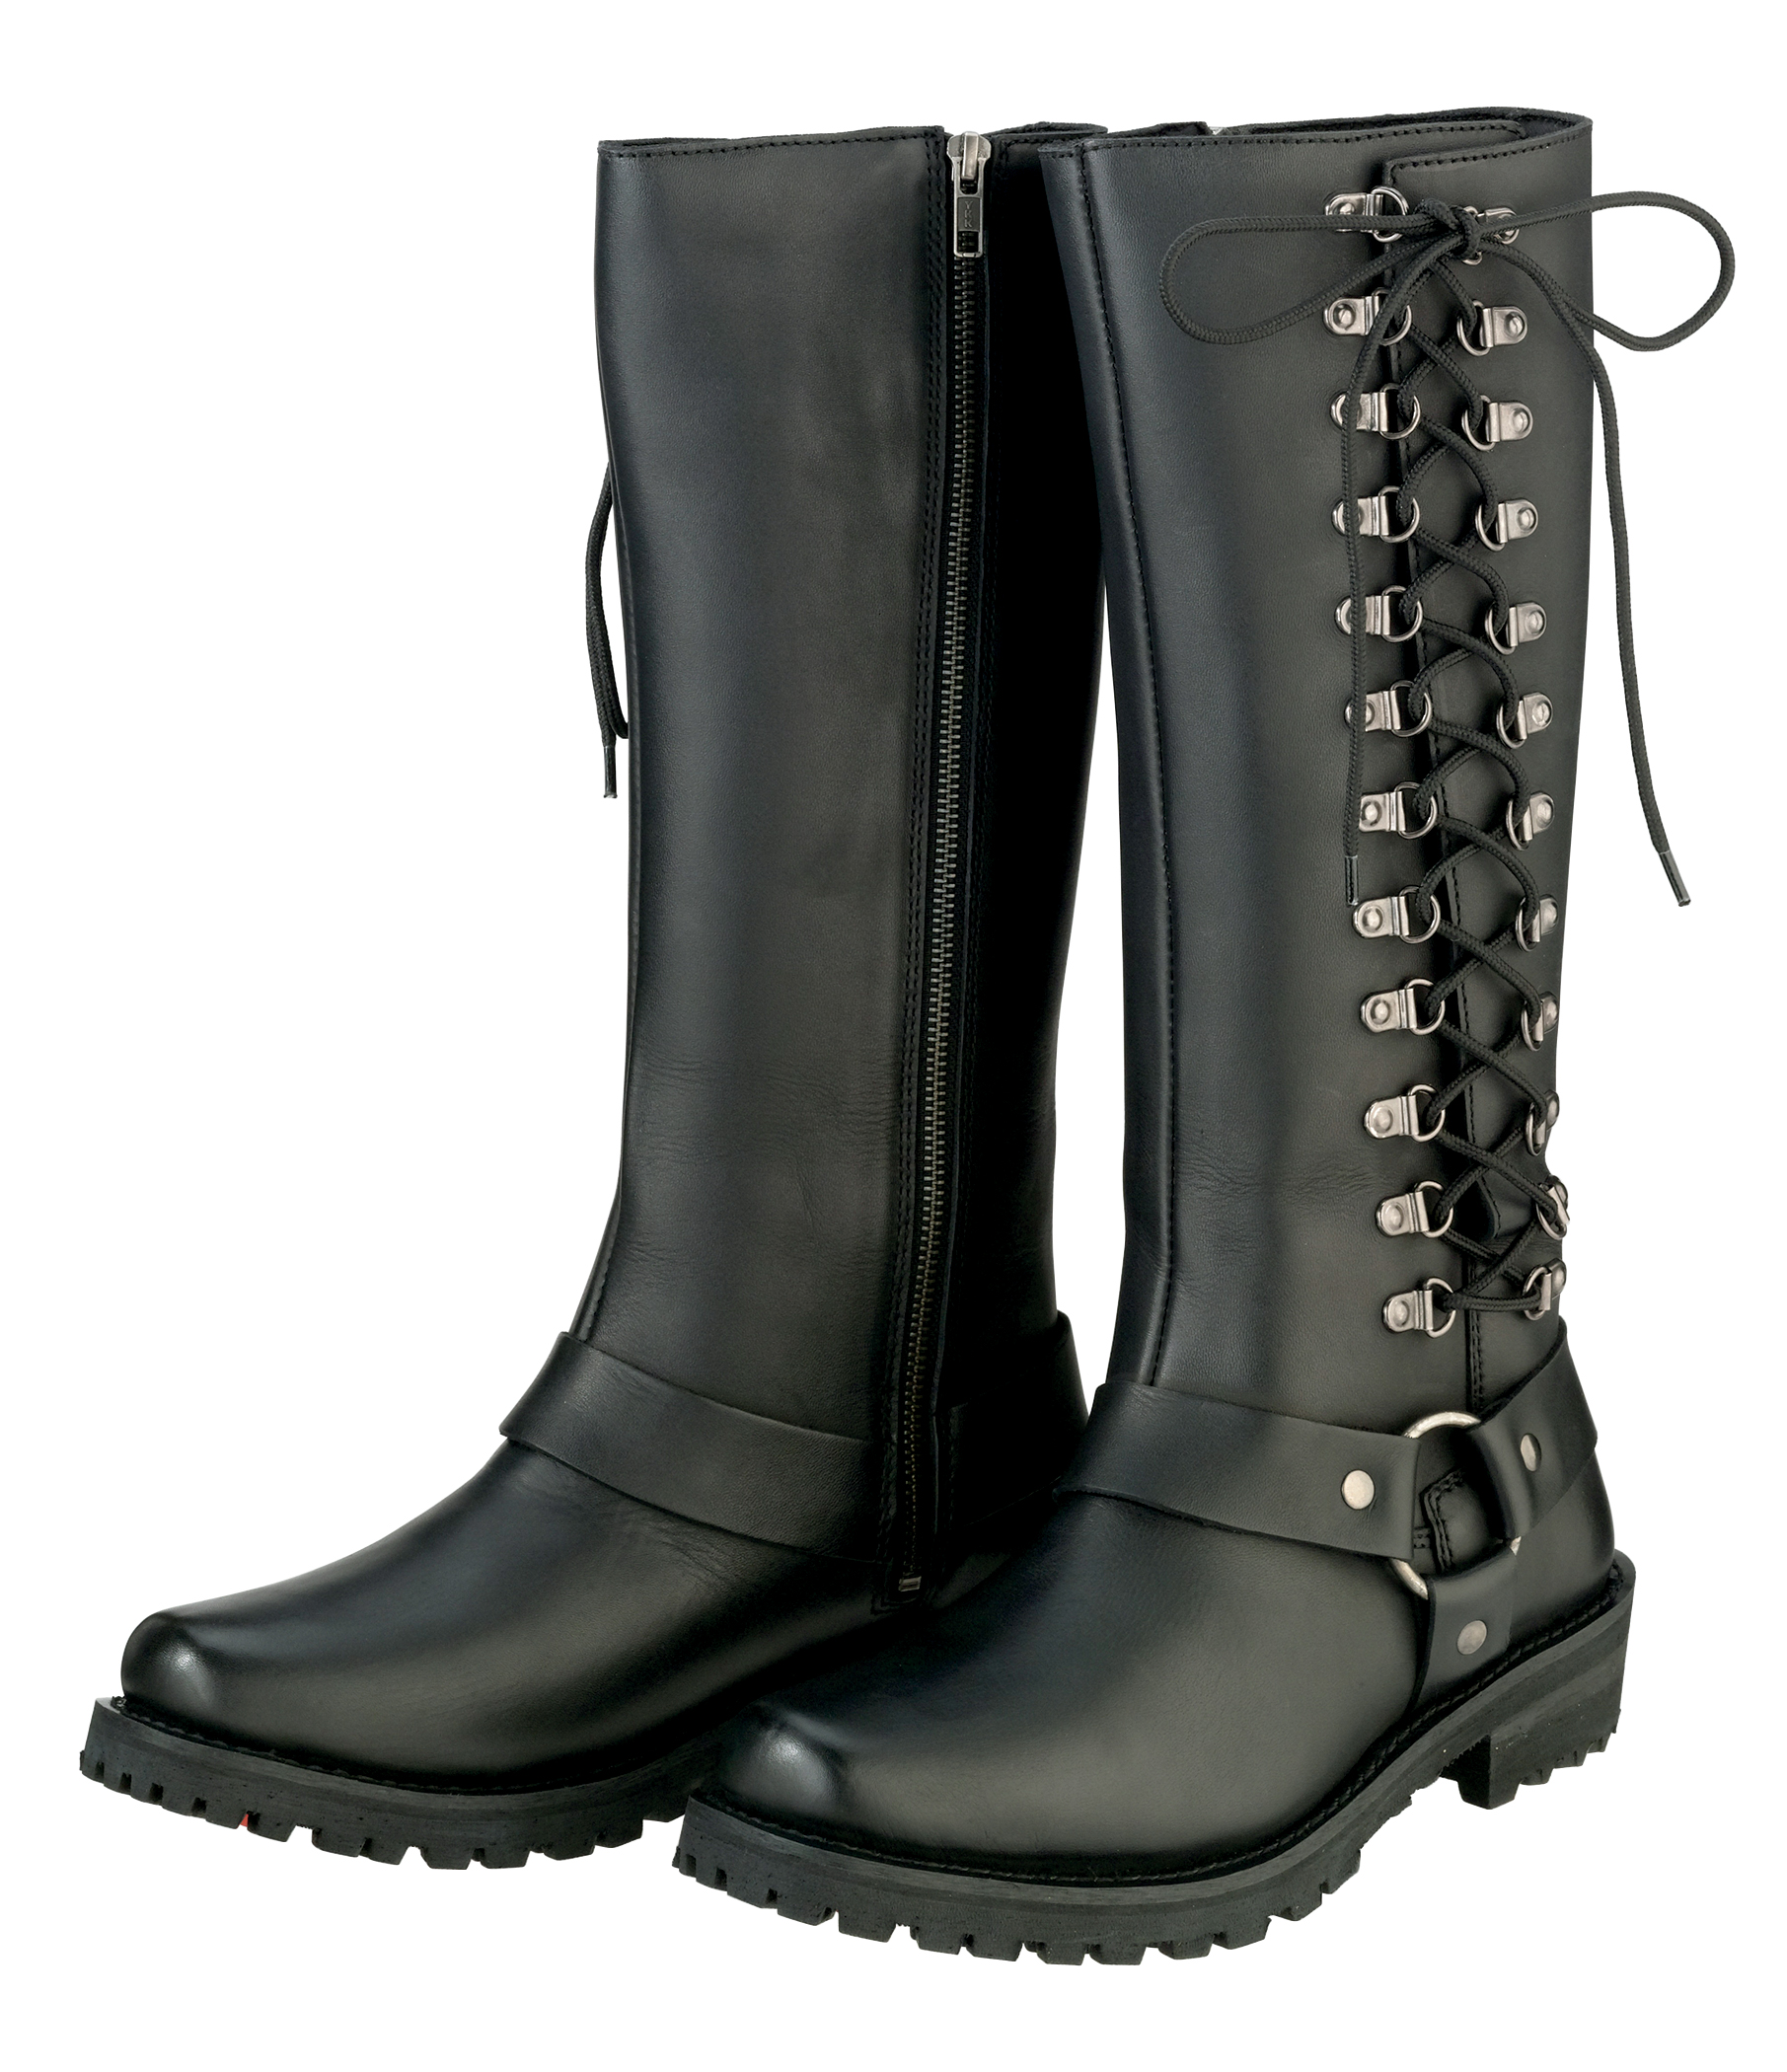 Women's Motorcycle Boots & Riding Shoes | Shop Best Riding Boots - Cycle  Gear